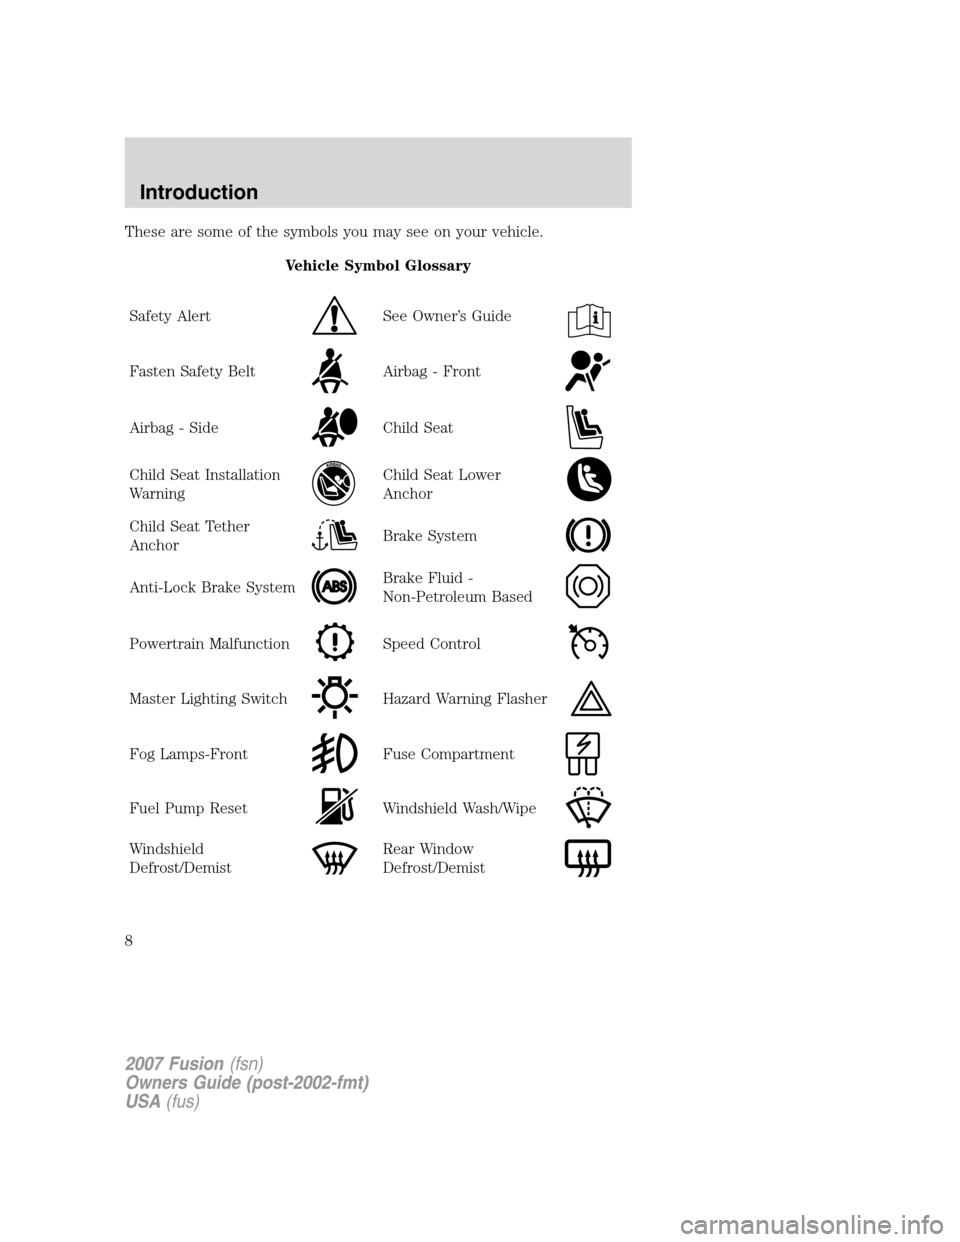 FORD FUSION (AMERICAS) 2007 1.G Owners Manual These are some of the symbols you may see on your vehicle.
Vehicle Symbol Glossary
Safety Alert
See Owner’s Guide
Fasten Safety BeltAirbag - Front
Airbag - SideChild Seat
Child Seat Installation
War